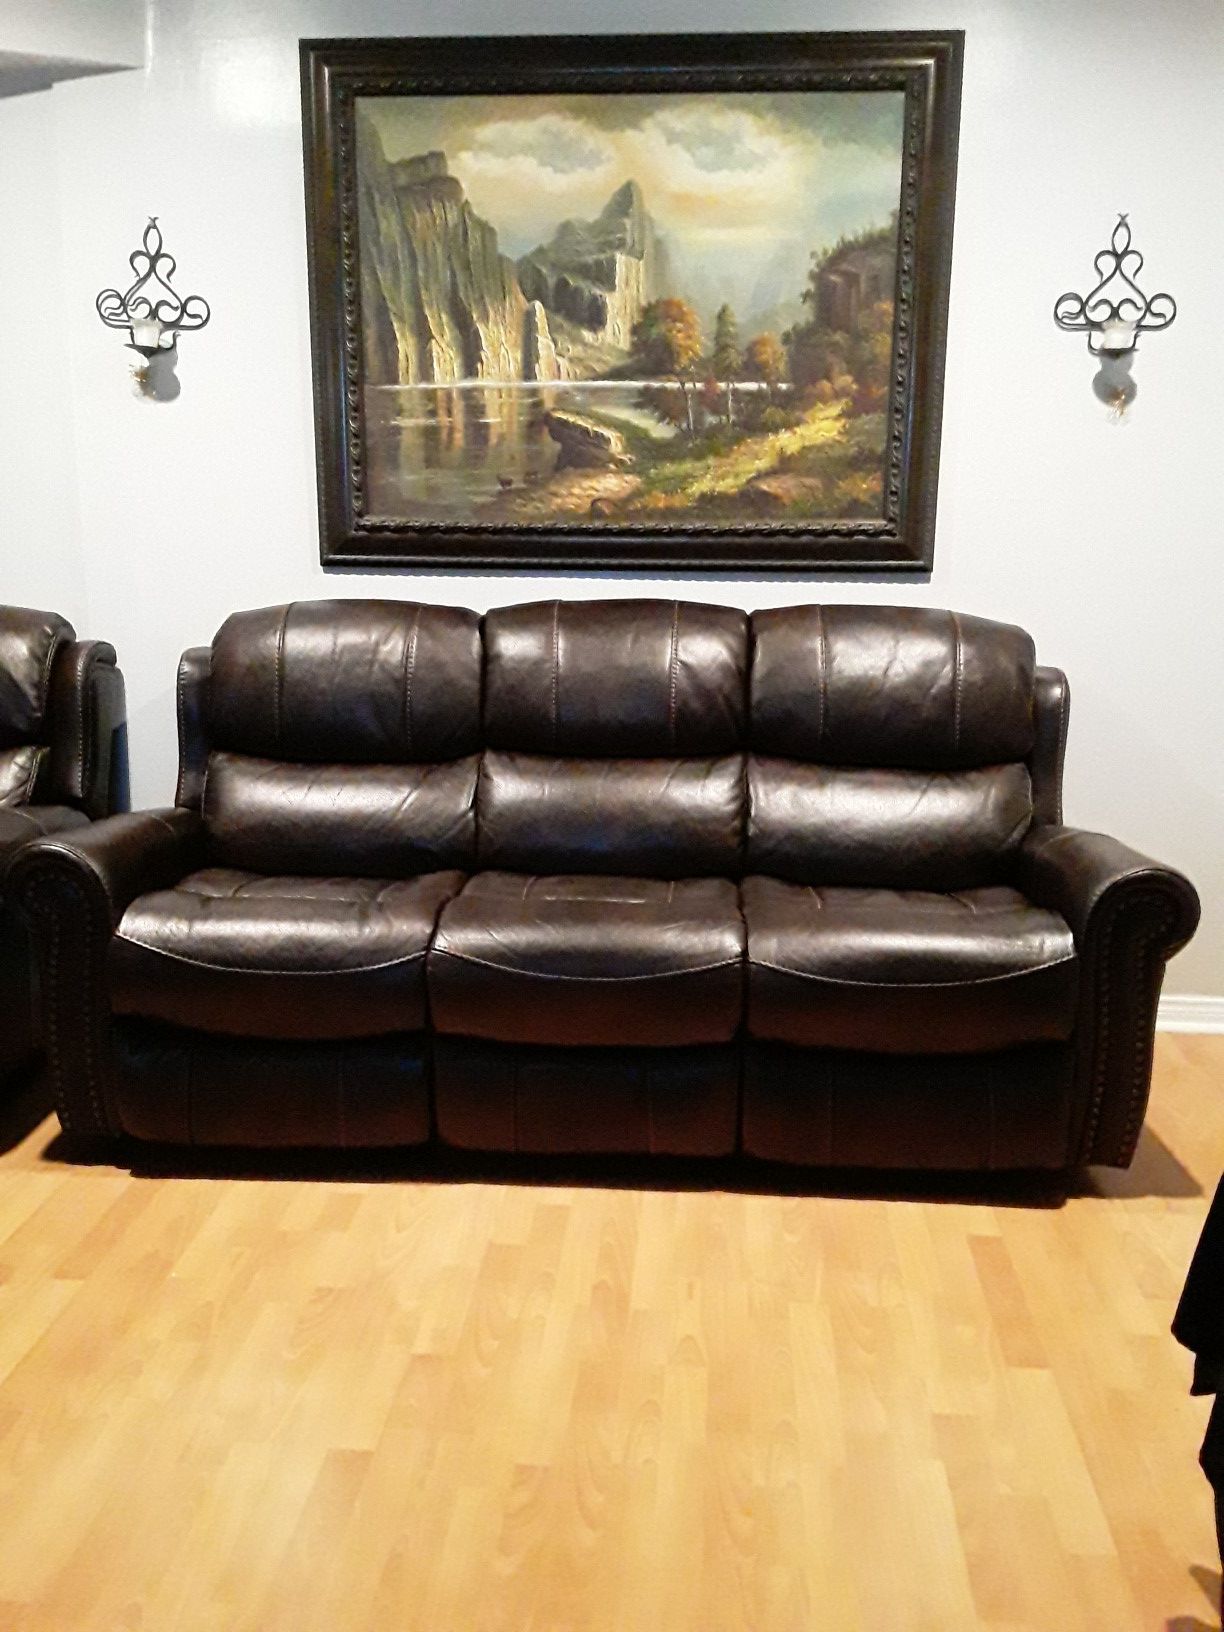 Leather couch